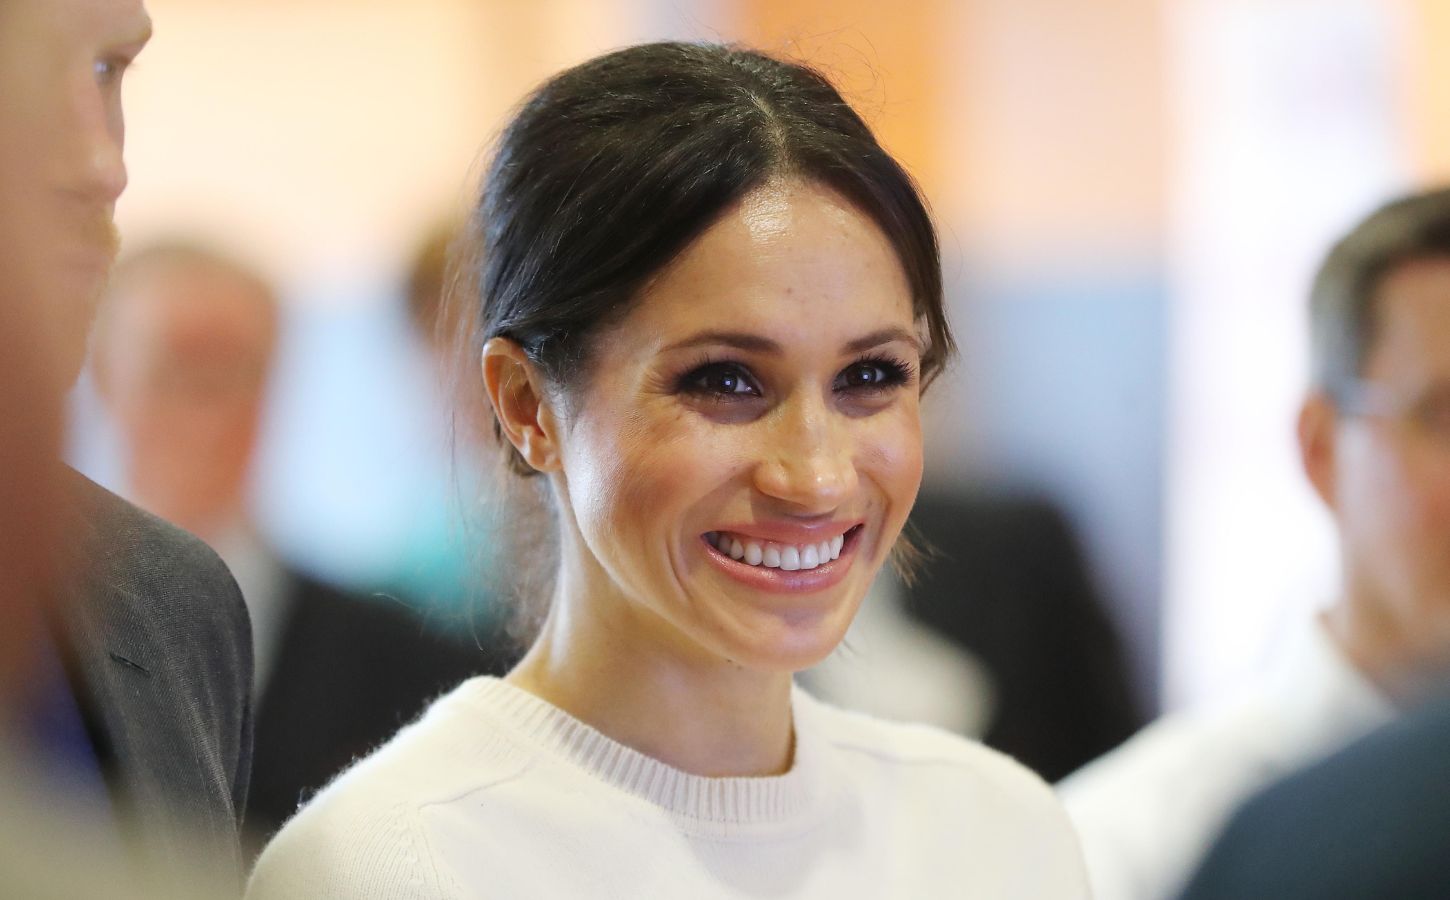 Duchess of Sussex Meghan Markle smiling at an event